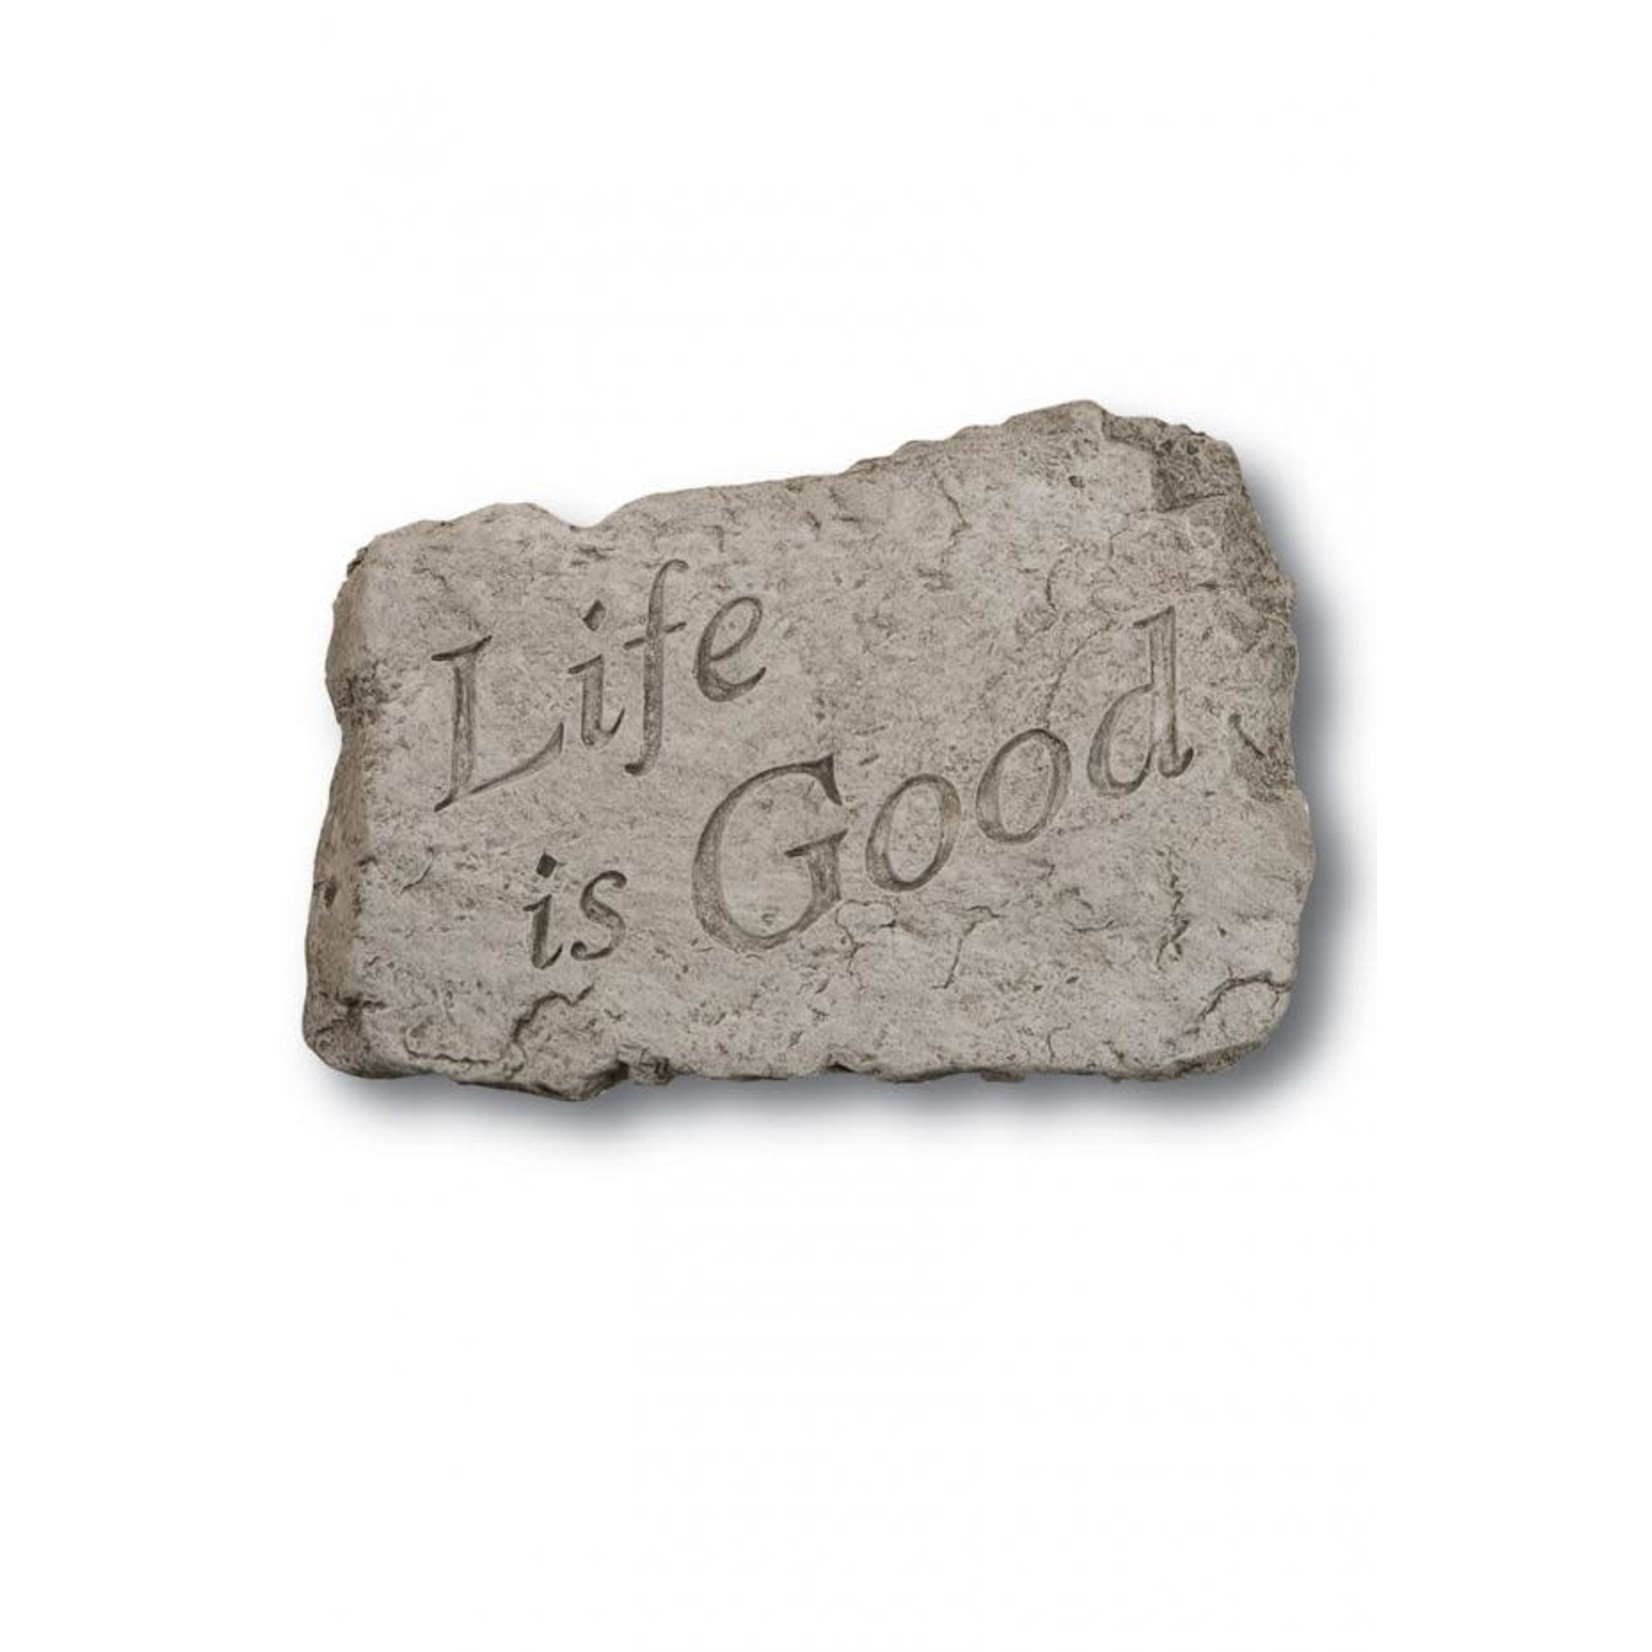 STEPPING STONE 10IN - LIFE IS GOOD